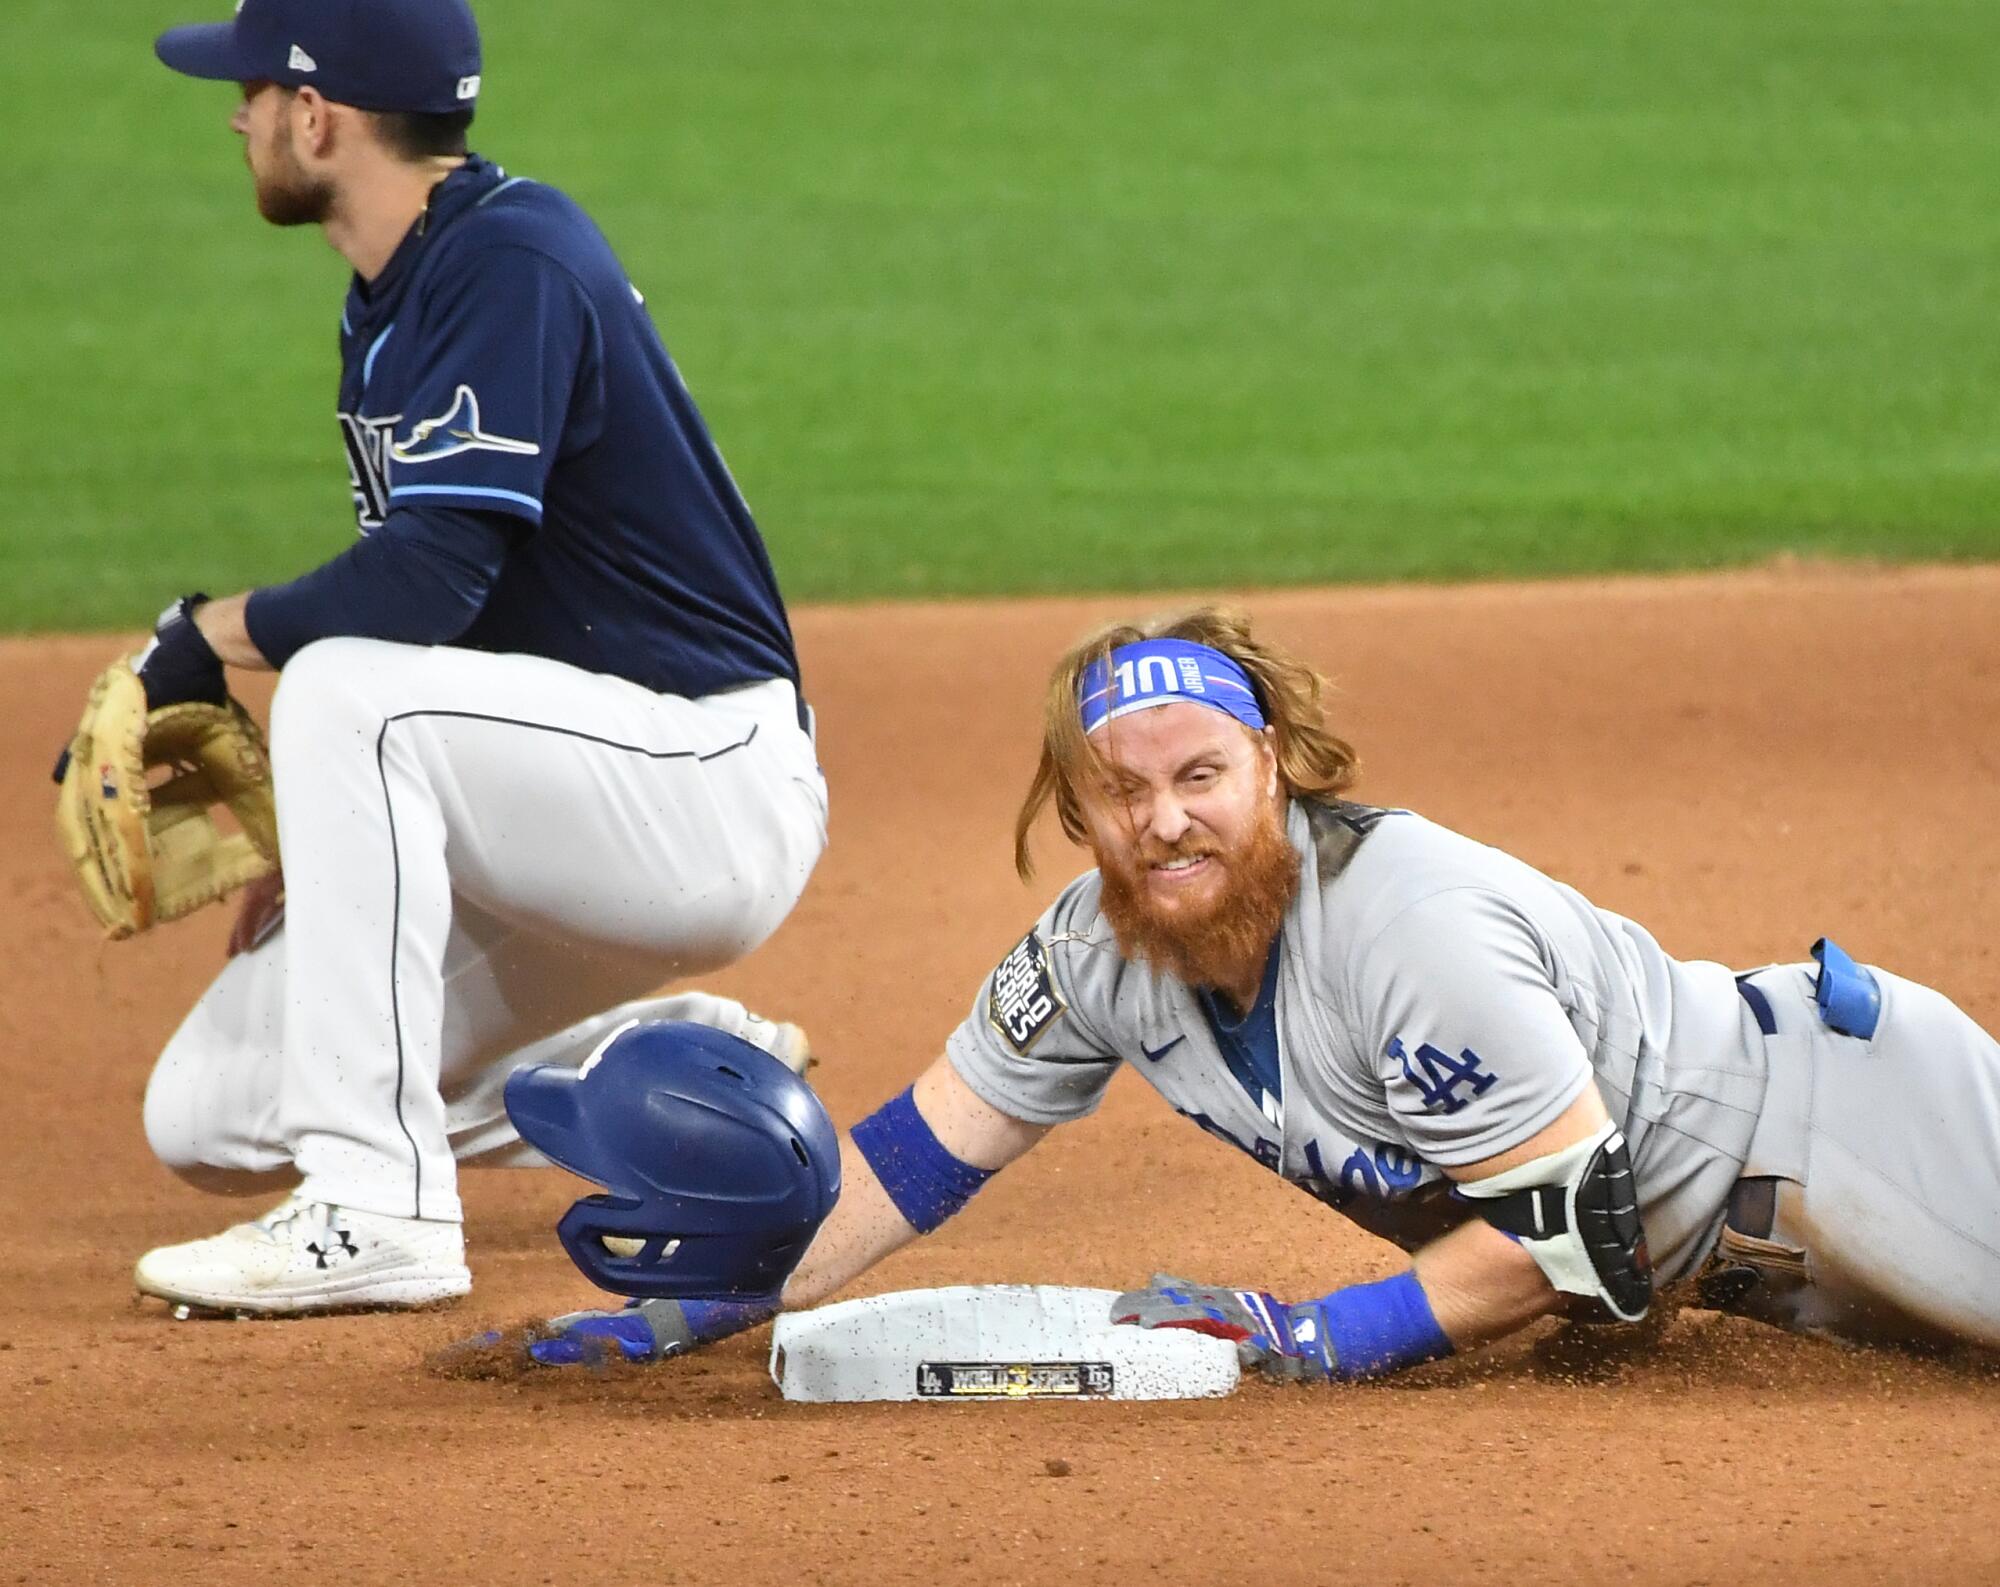 Dodgers Justin Turner slides safely for a double against the Rays in the 7th inning.